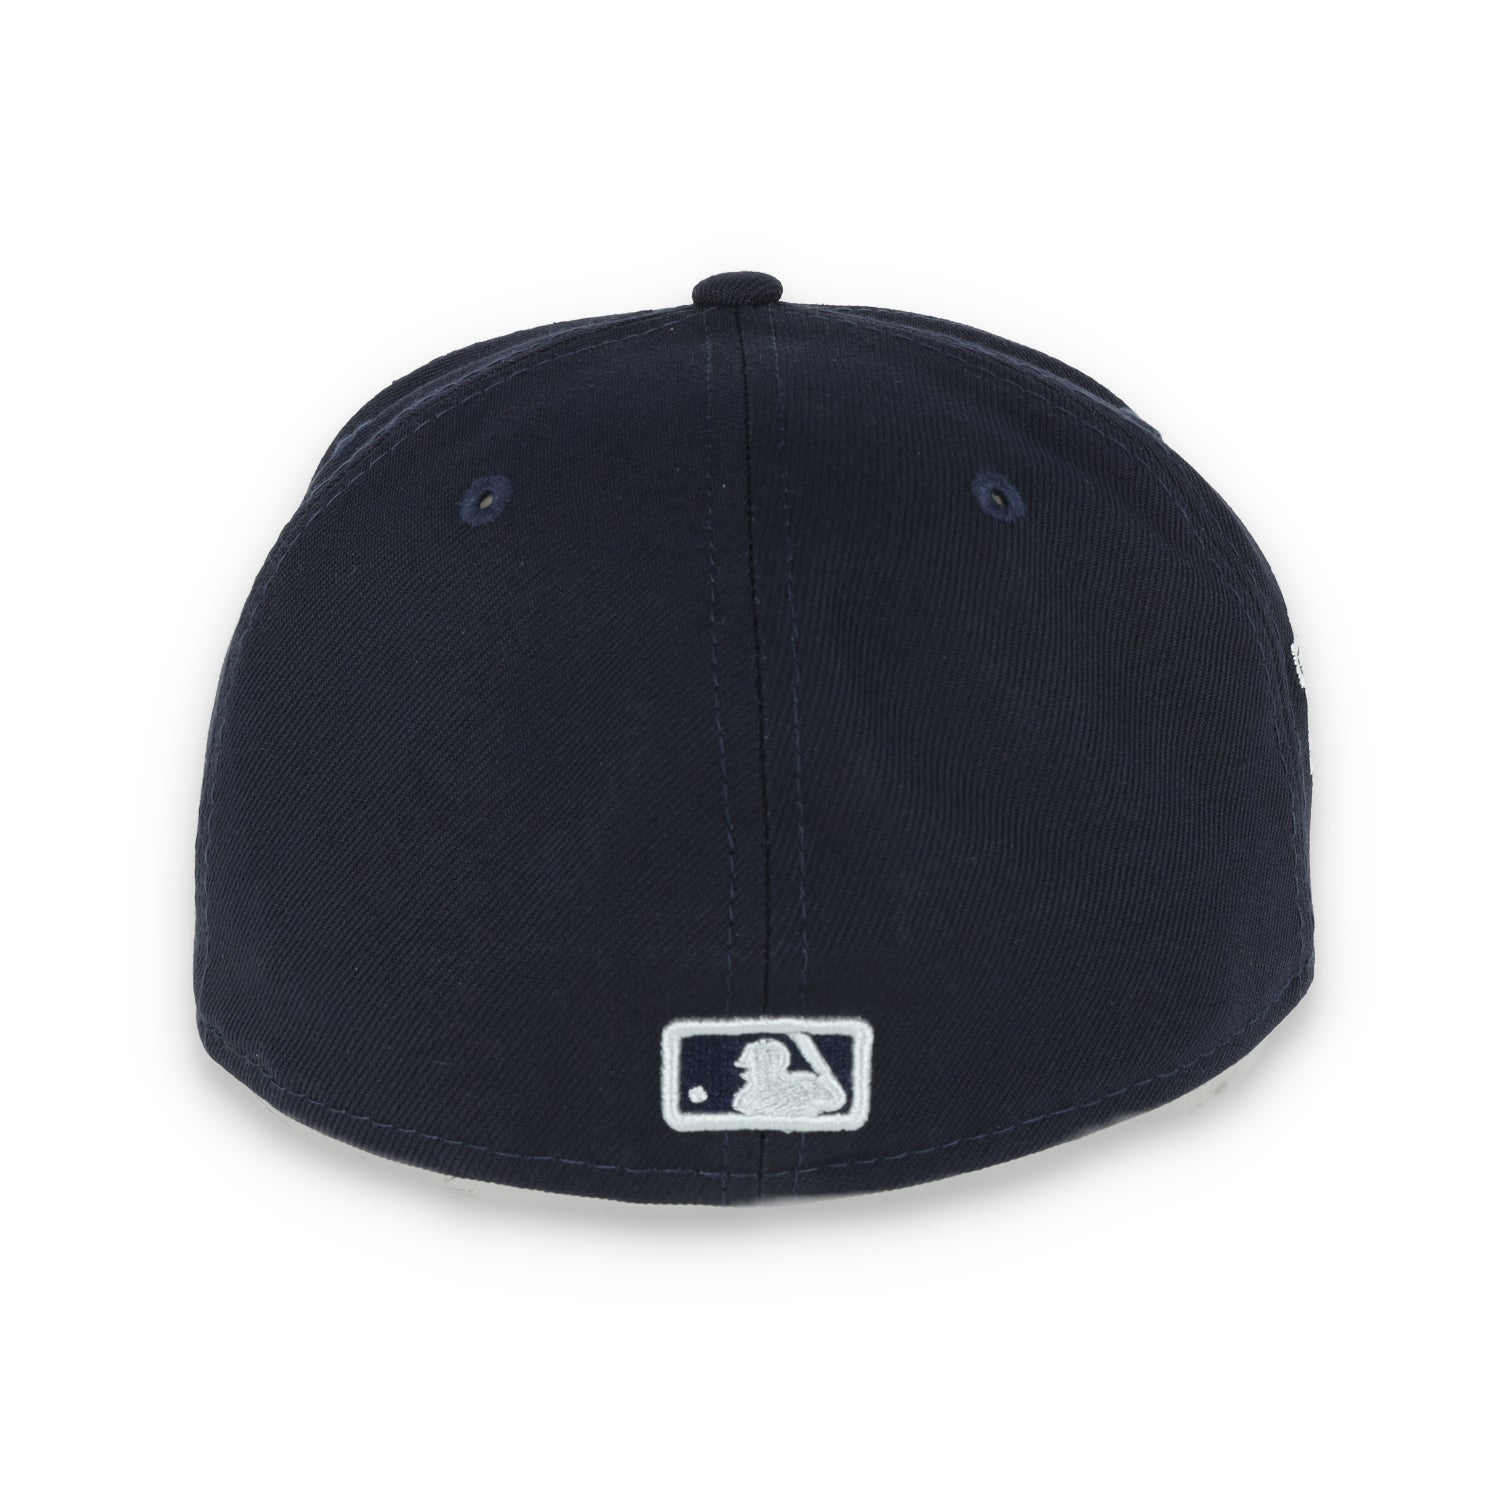 New Era New York Yankees Team Name Side Patch 59FIFTY Fitted Hat